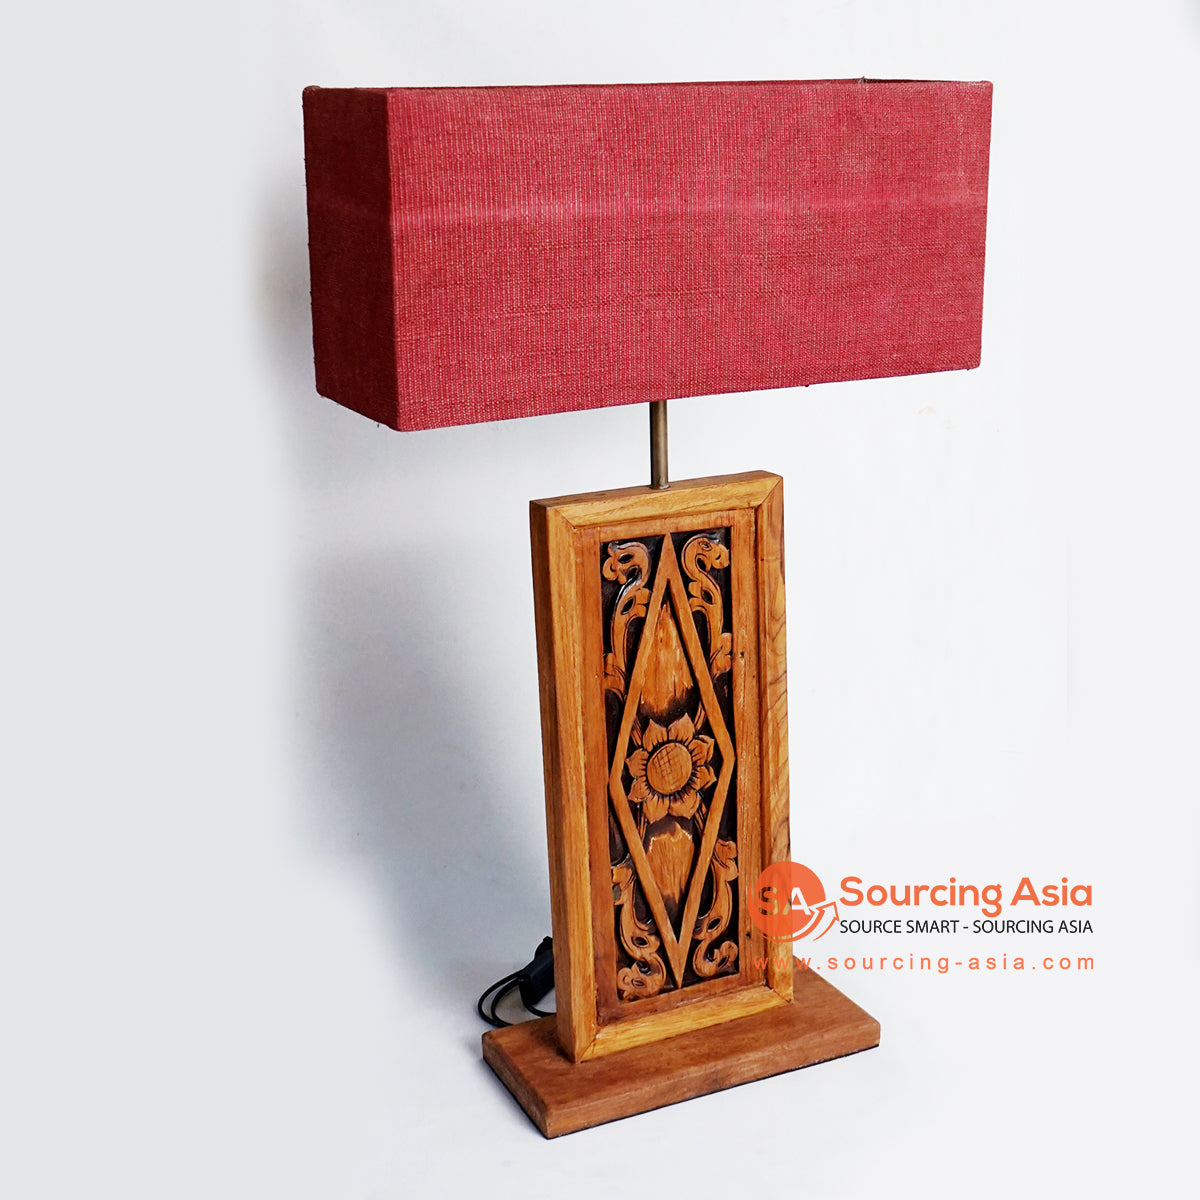 CHKC019 NATURAL TEAK WOOD DECORATIVE CARVED TABLE LAMP WITH SQUARE RED SHADE